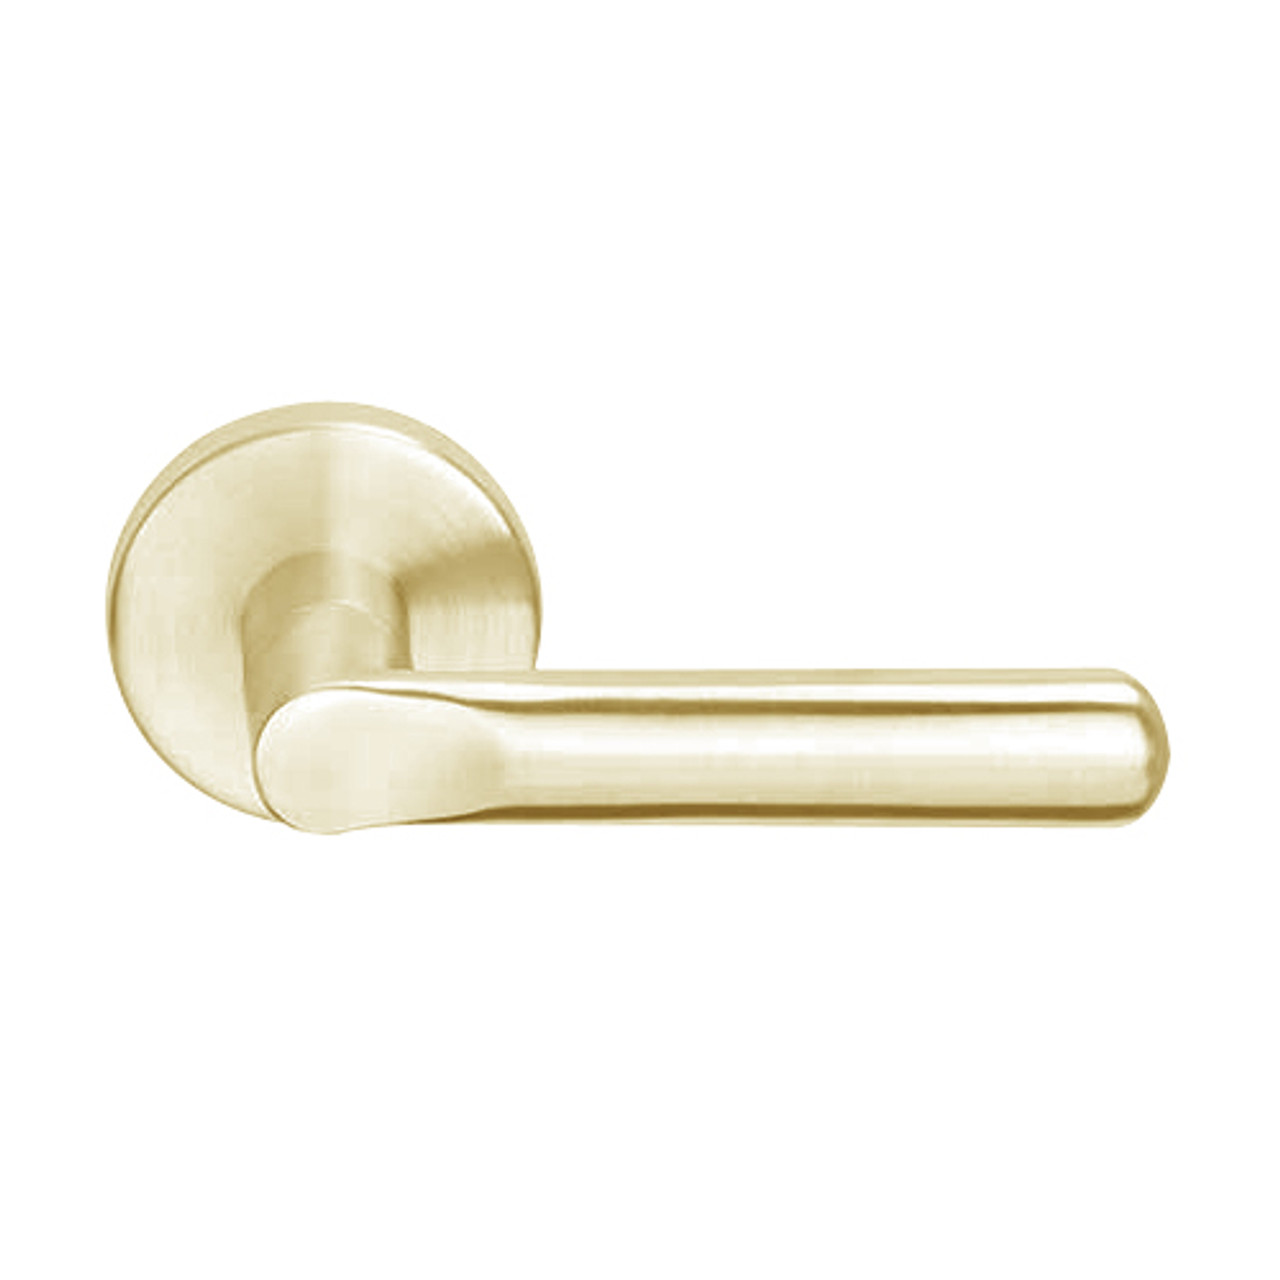 L9453L-18B-606 Schlage L Series Less Cylinder Entrance with Deadbolt Commercial Mortise Lock with 18 Cast Lever Design in Satin Brass